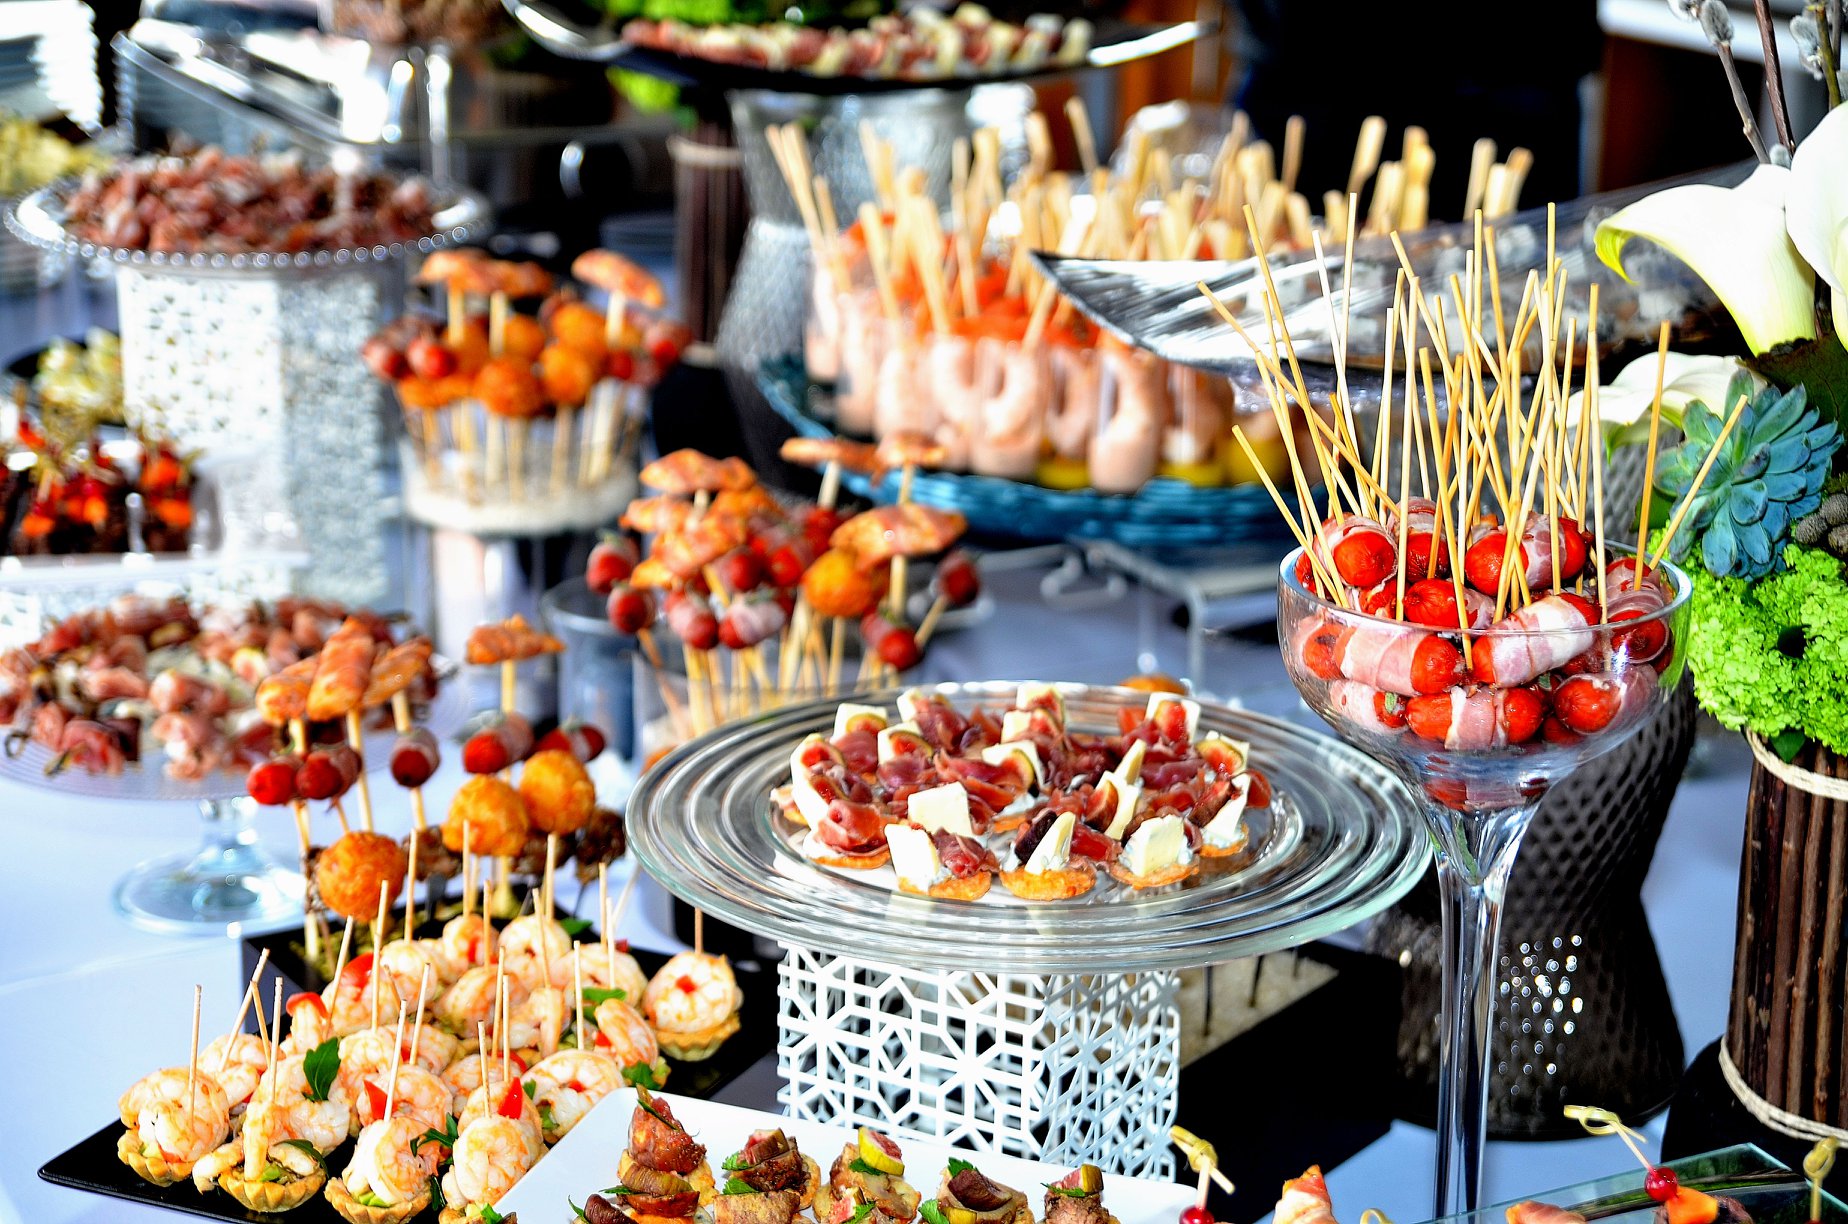 Elegant Catering "Every small detail of an event is a way for us to